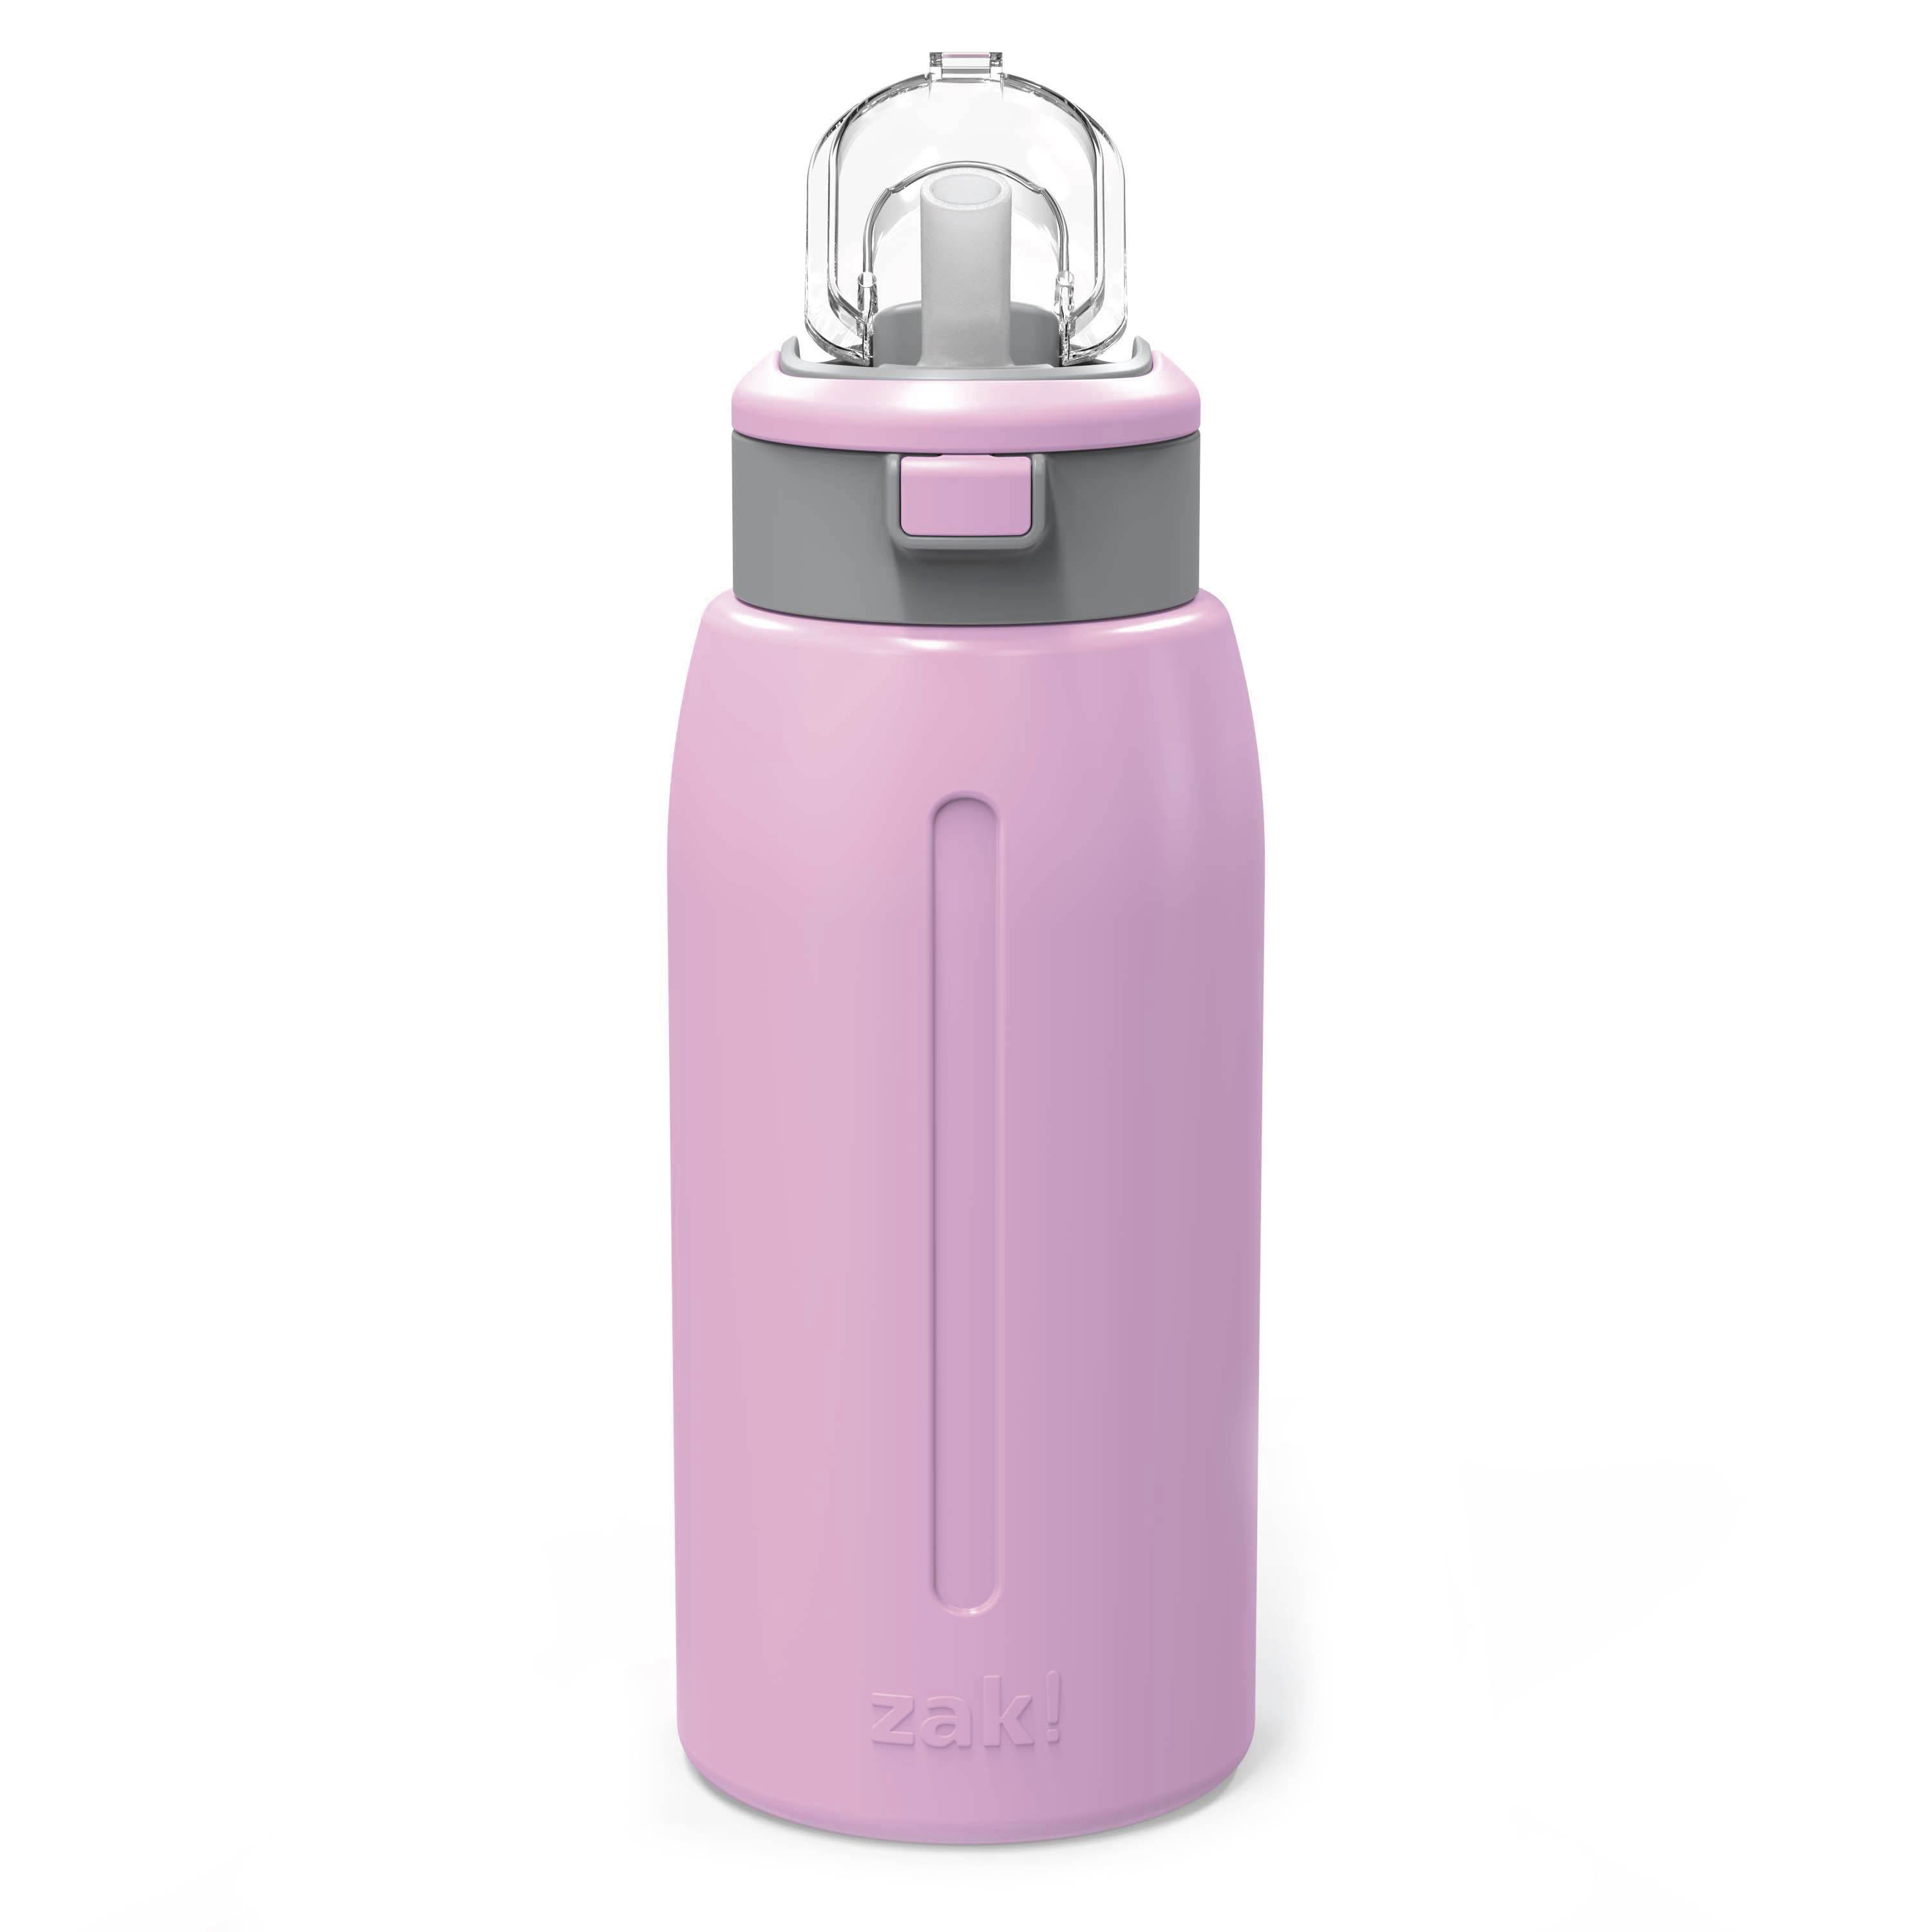 Genesis 32 ounce Stainless Steel Water Bottles, Lilac slideshow image 3